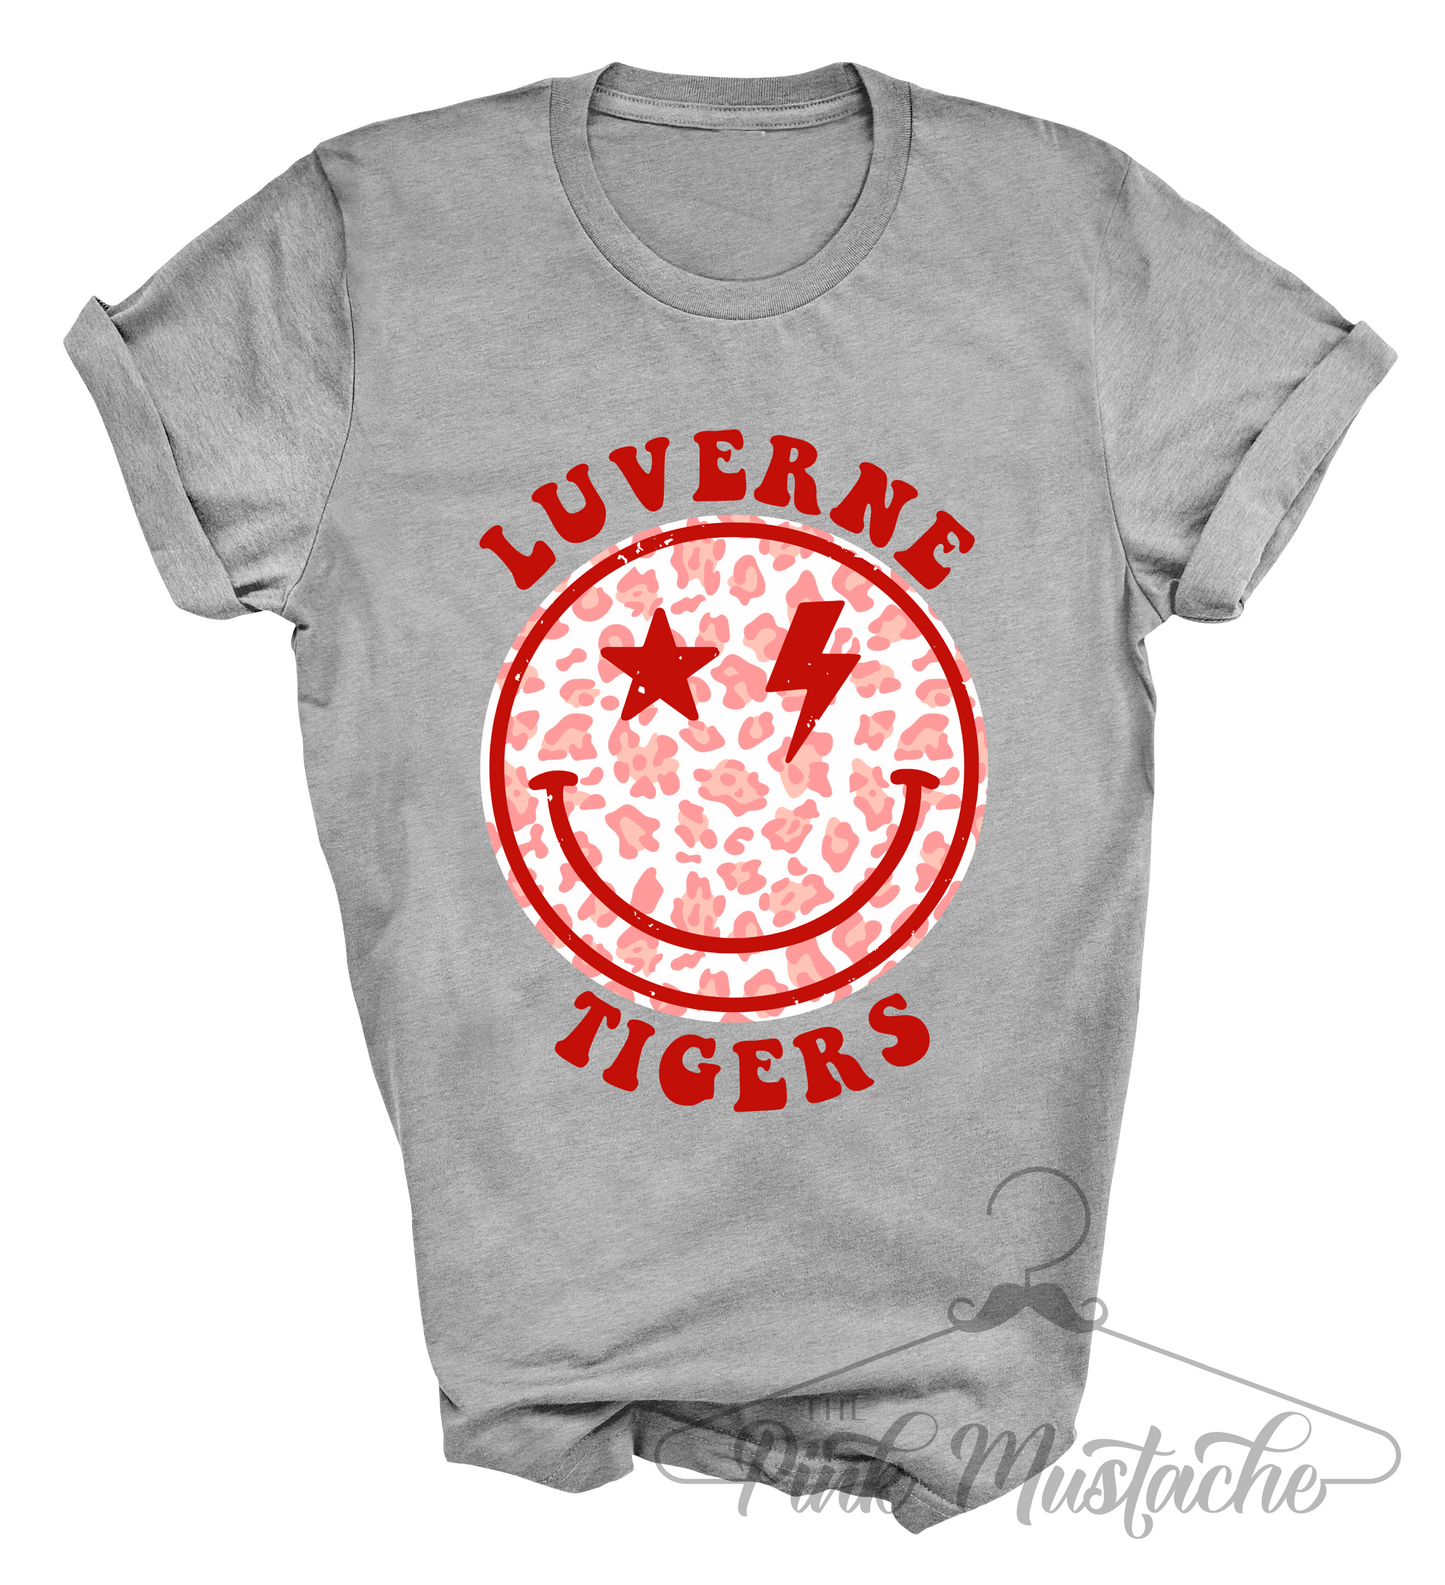 Luverne Tigers Smiley Soft Style School Tee